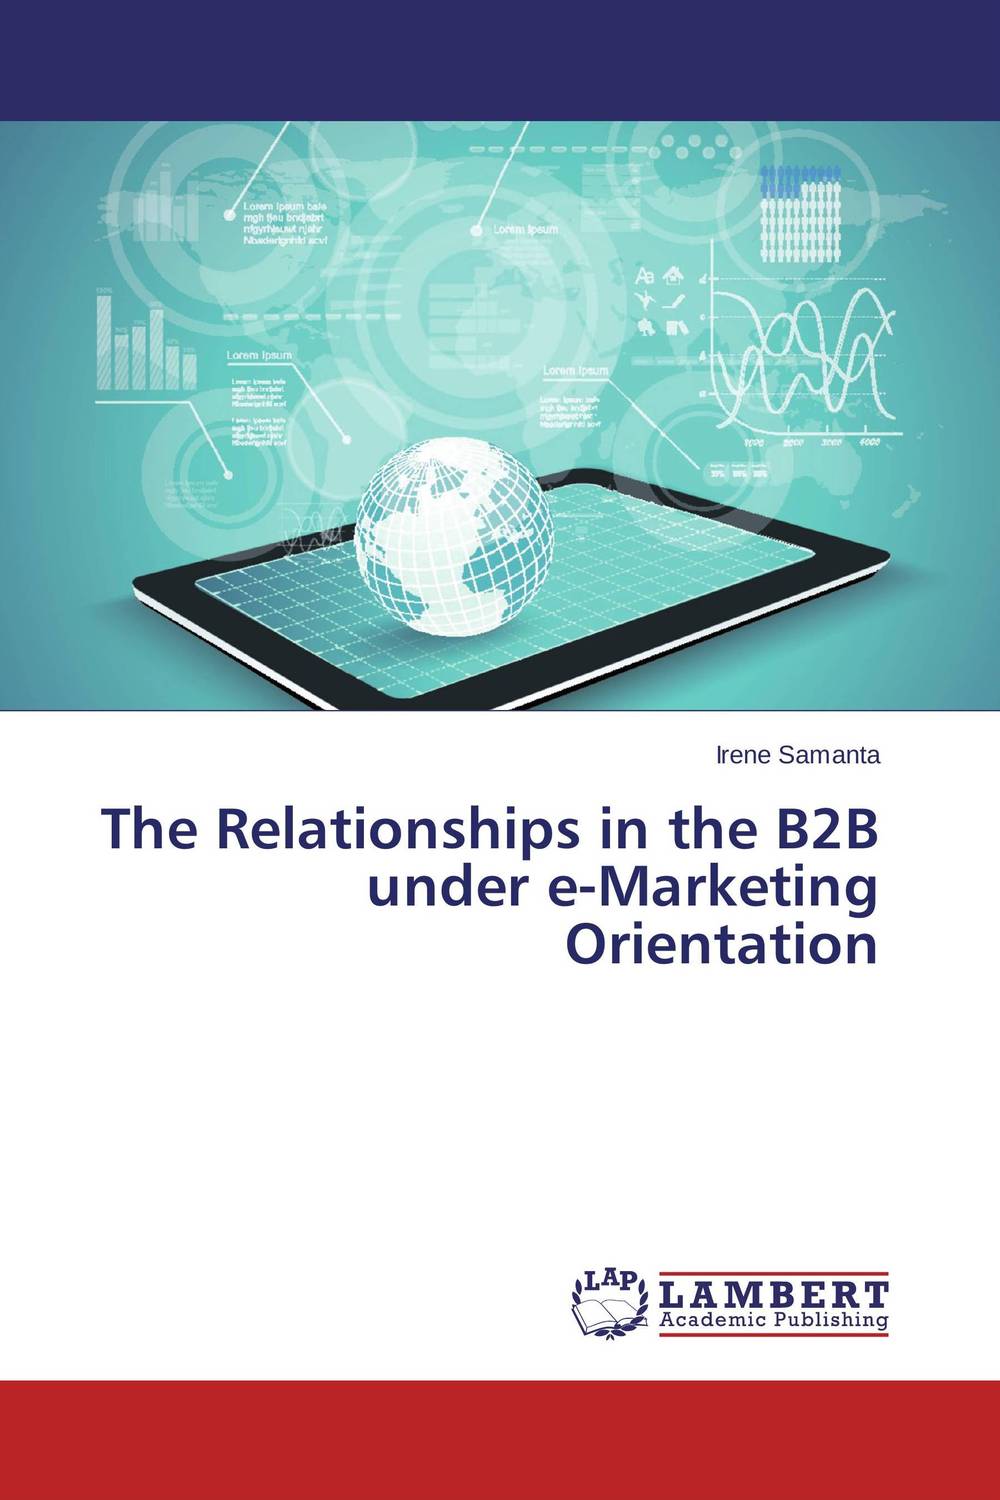 The Relationships in the B2B under e-Marketing Orientation